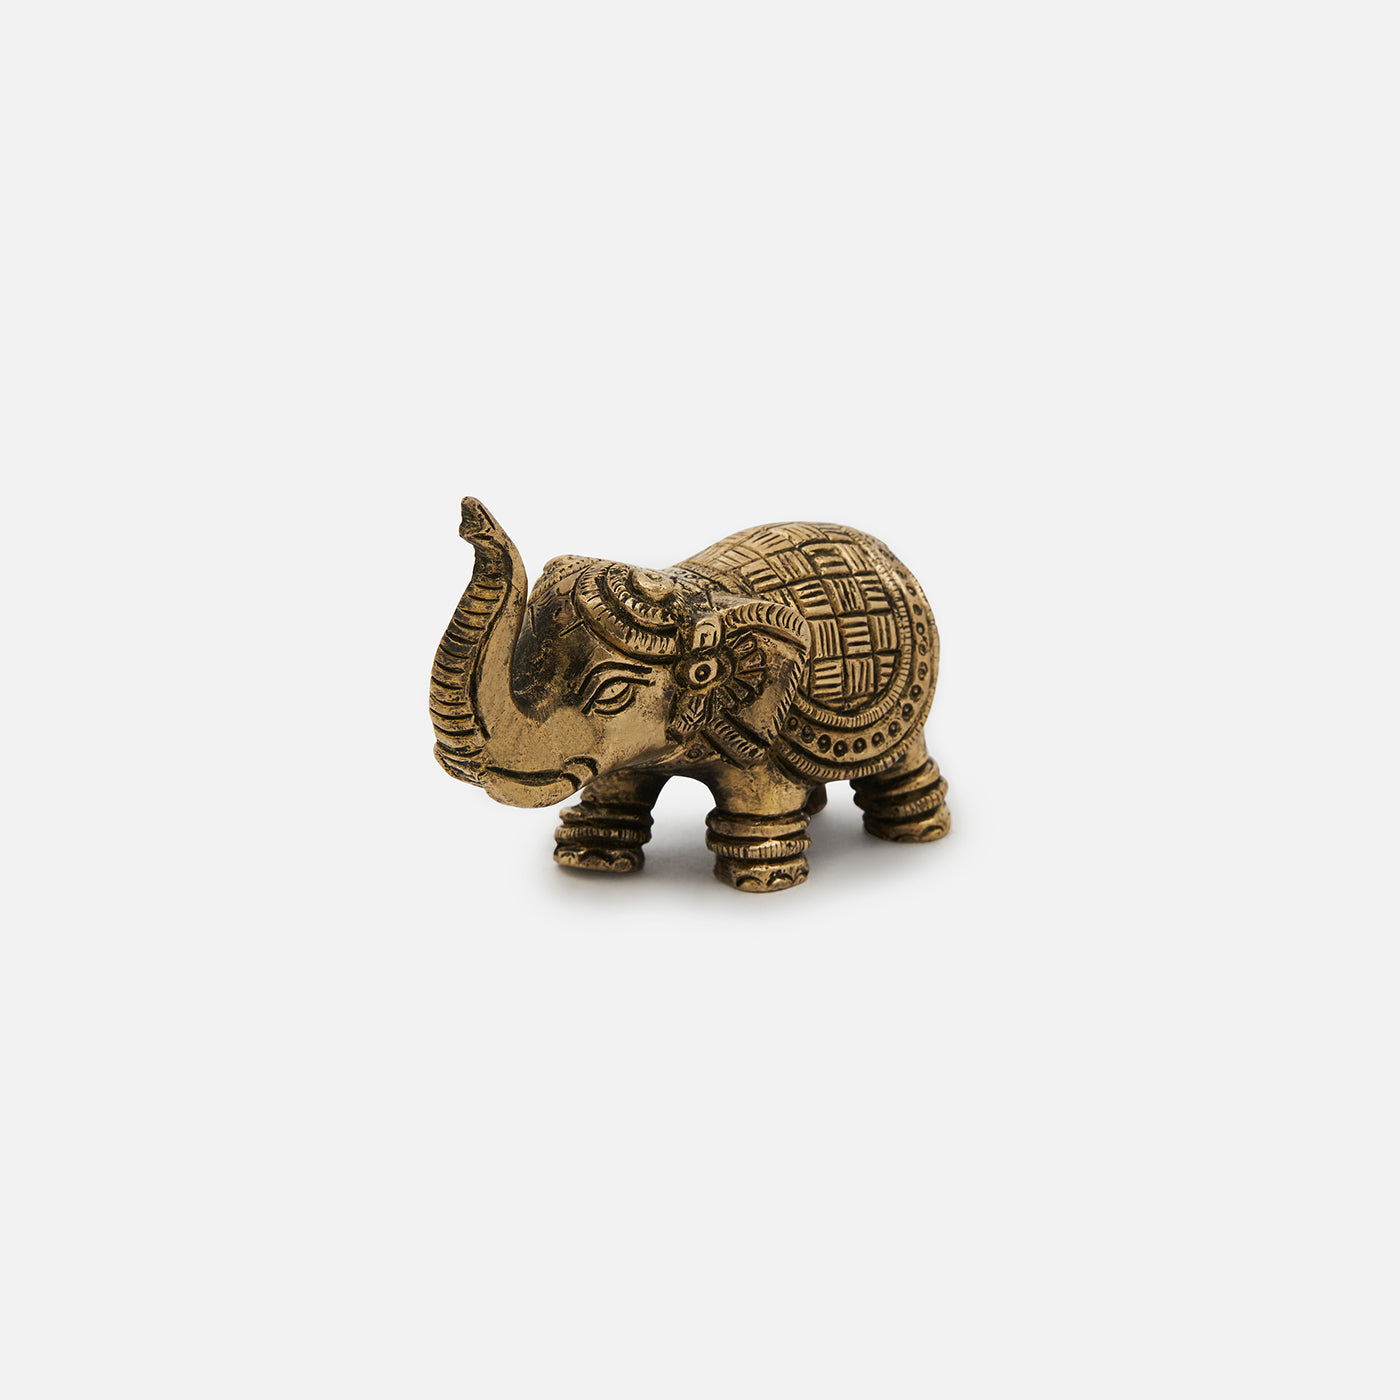 Brass Elephant Table Top Accent With Intricate Carving Work